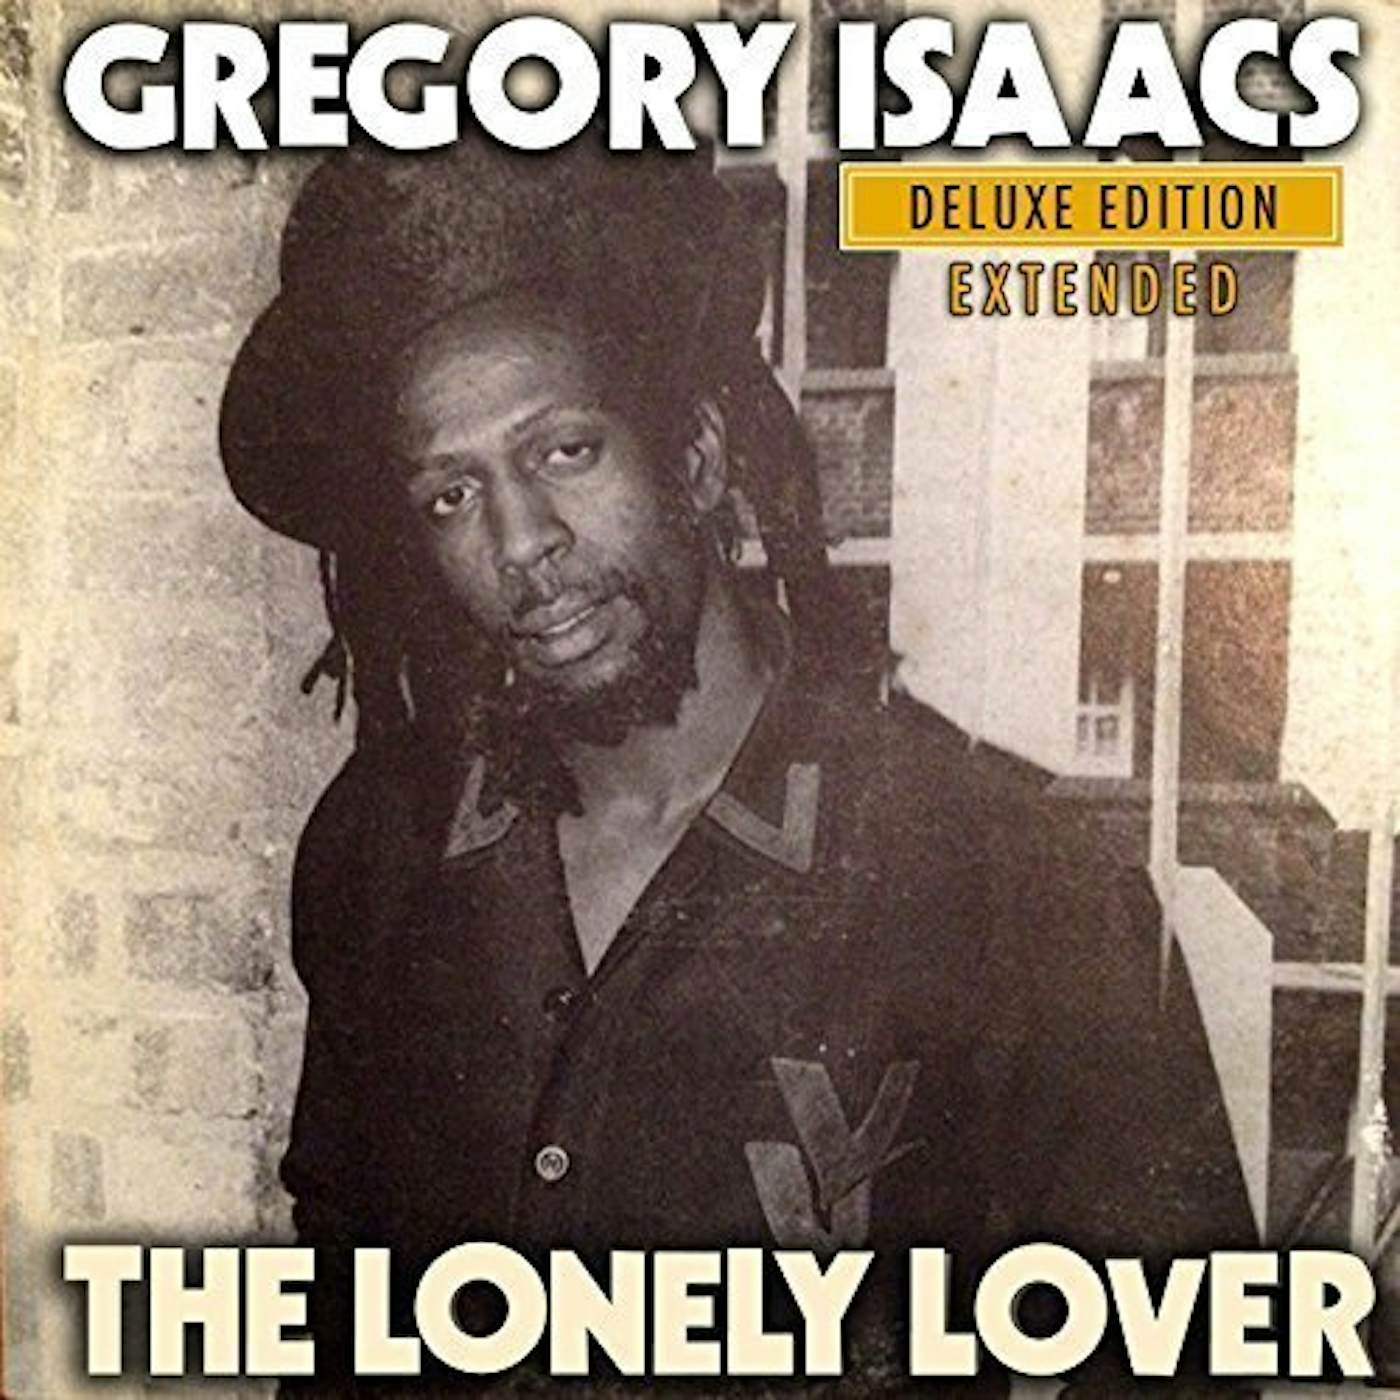 Gregory Isaacs LONELY LOVER CD